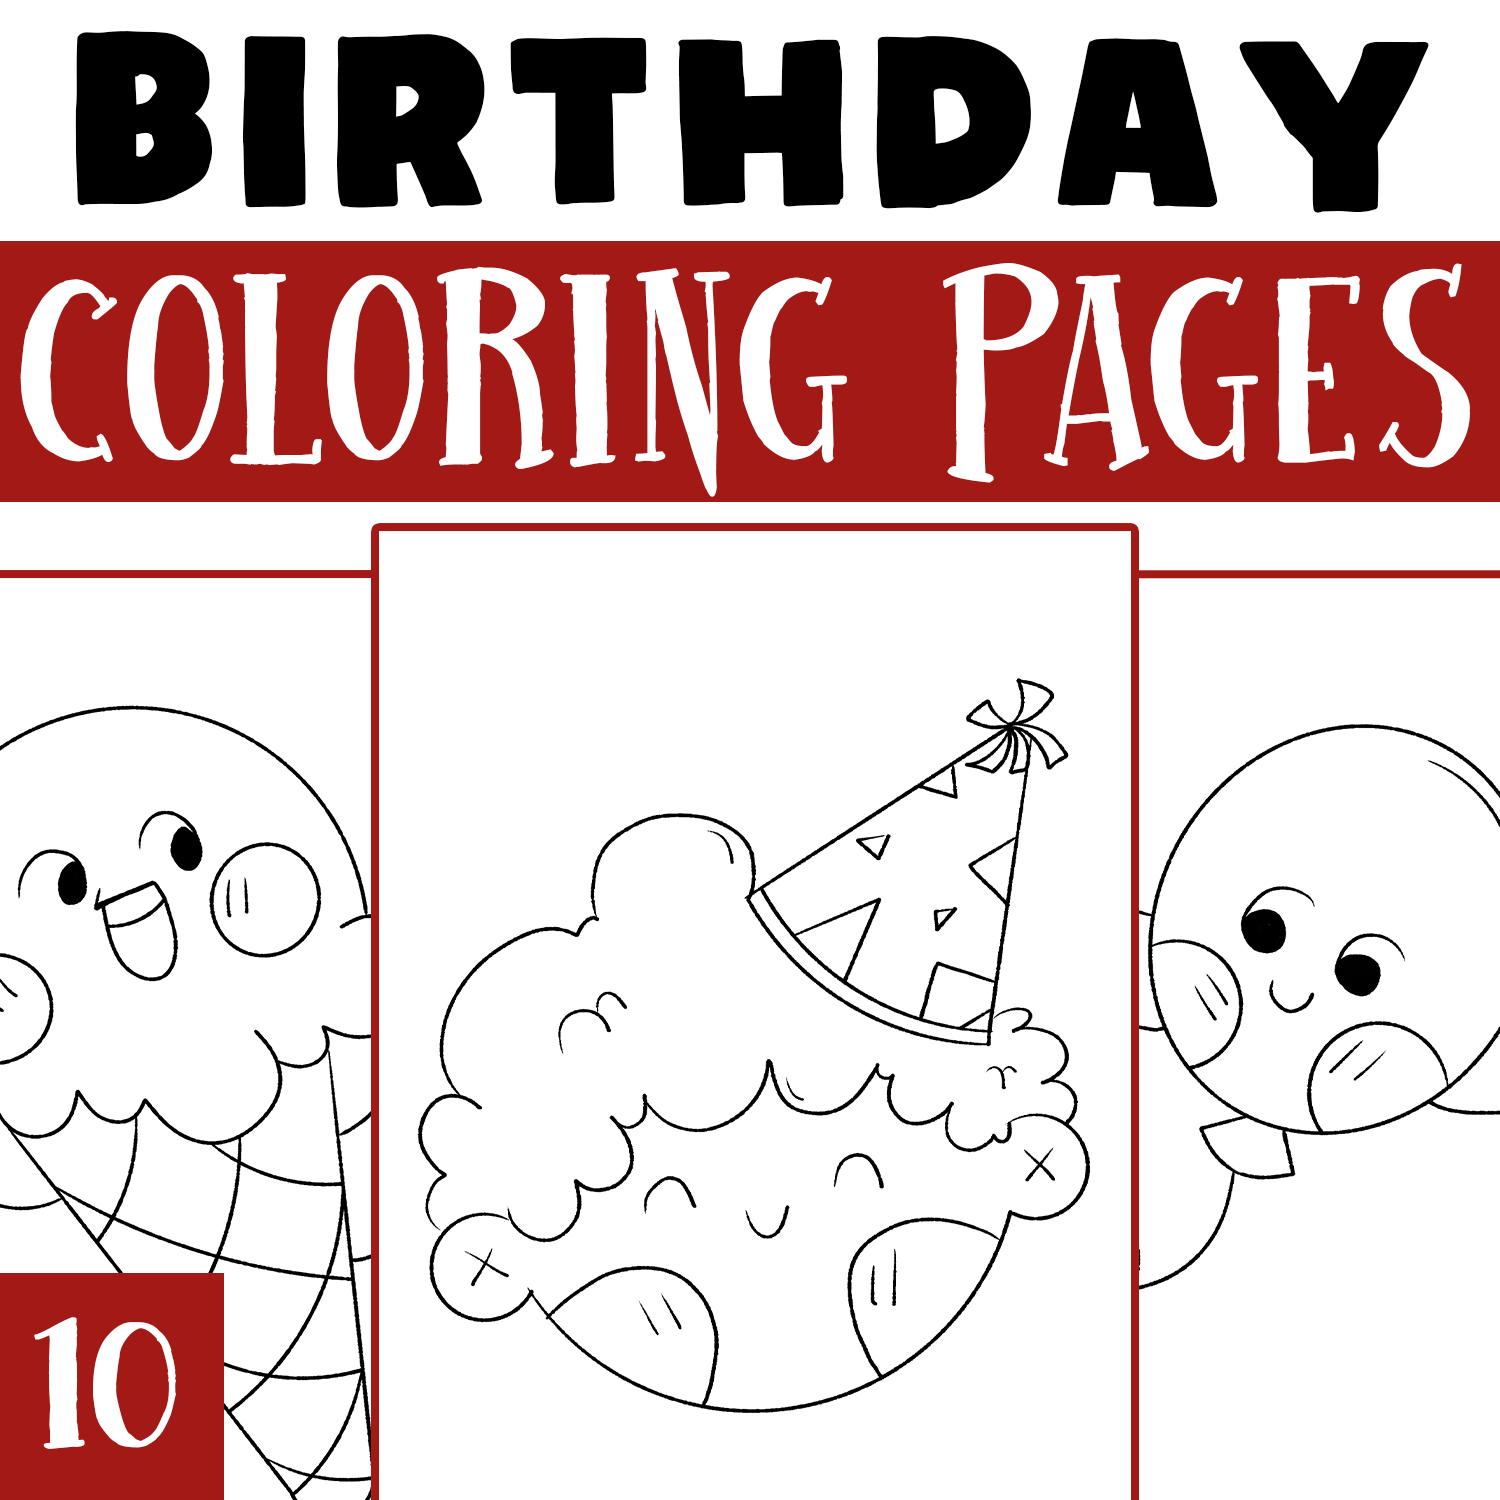 Happy birthday coloring pages happy birthday coloring sheets morning work made by teachers